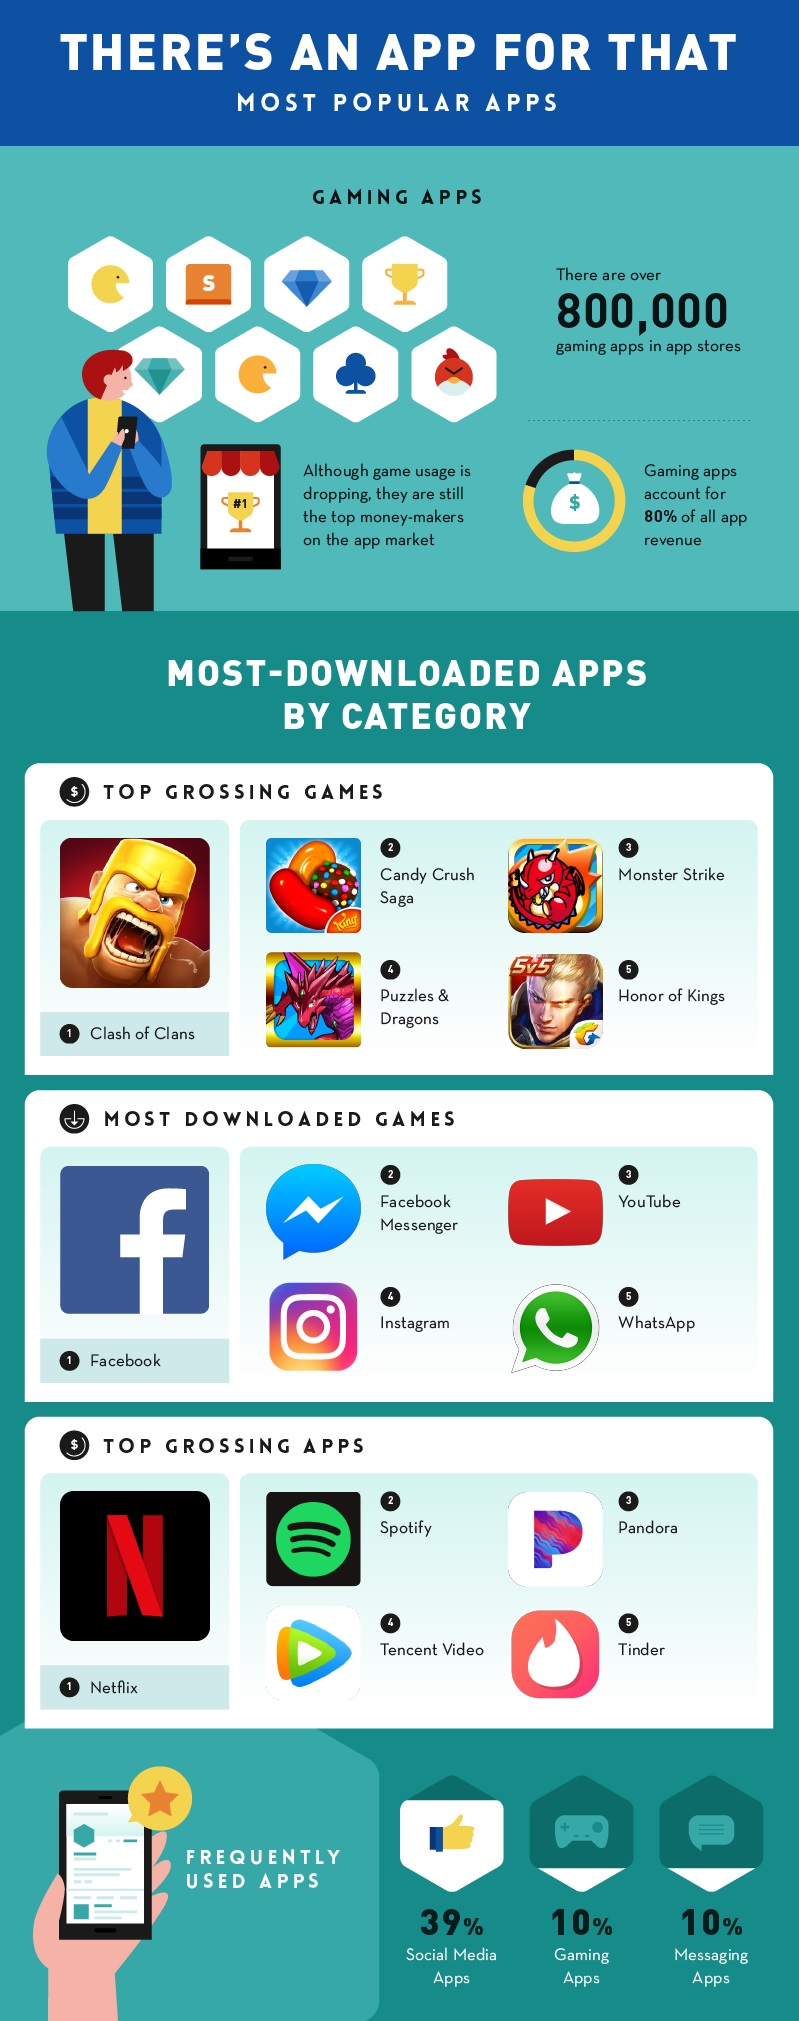 Apps that Changed the World